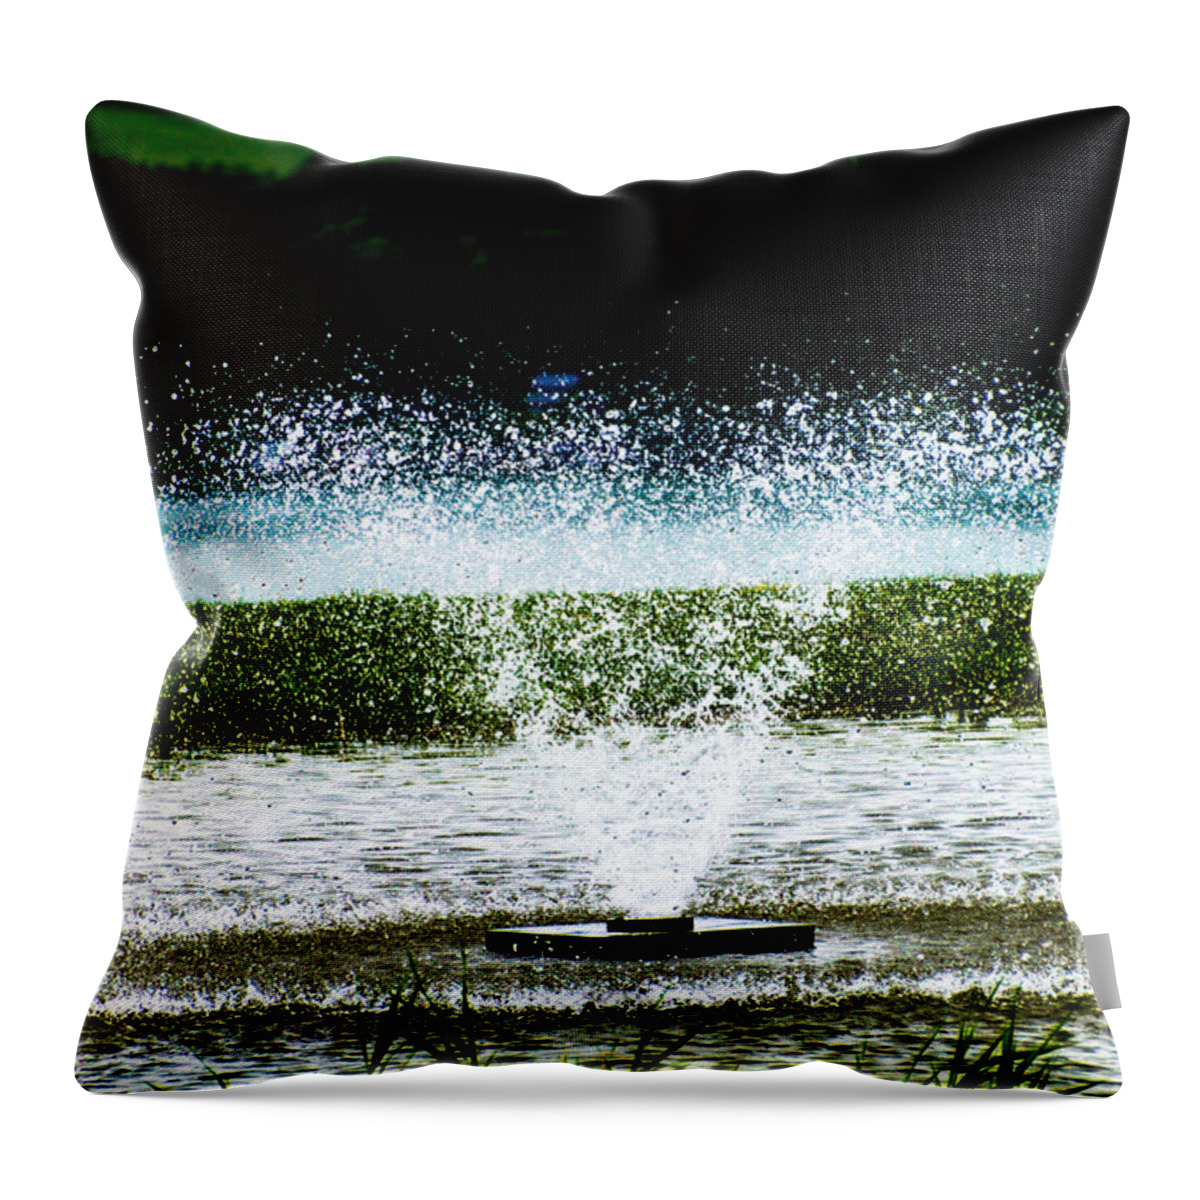 Water Throw Pillow featuring the photograph Starkey's Fountain by William Norton